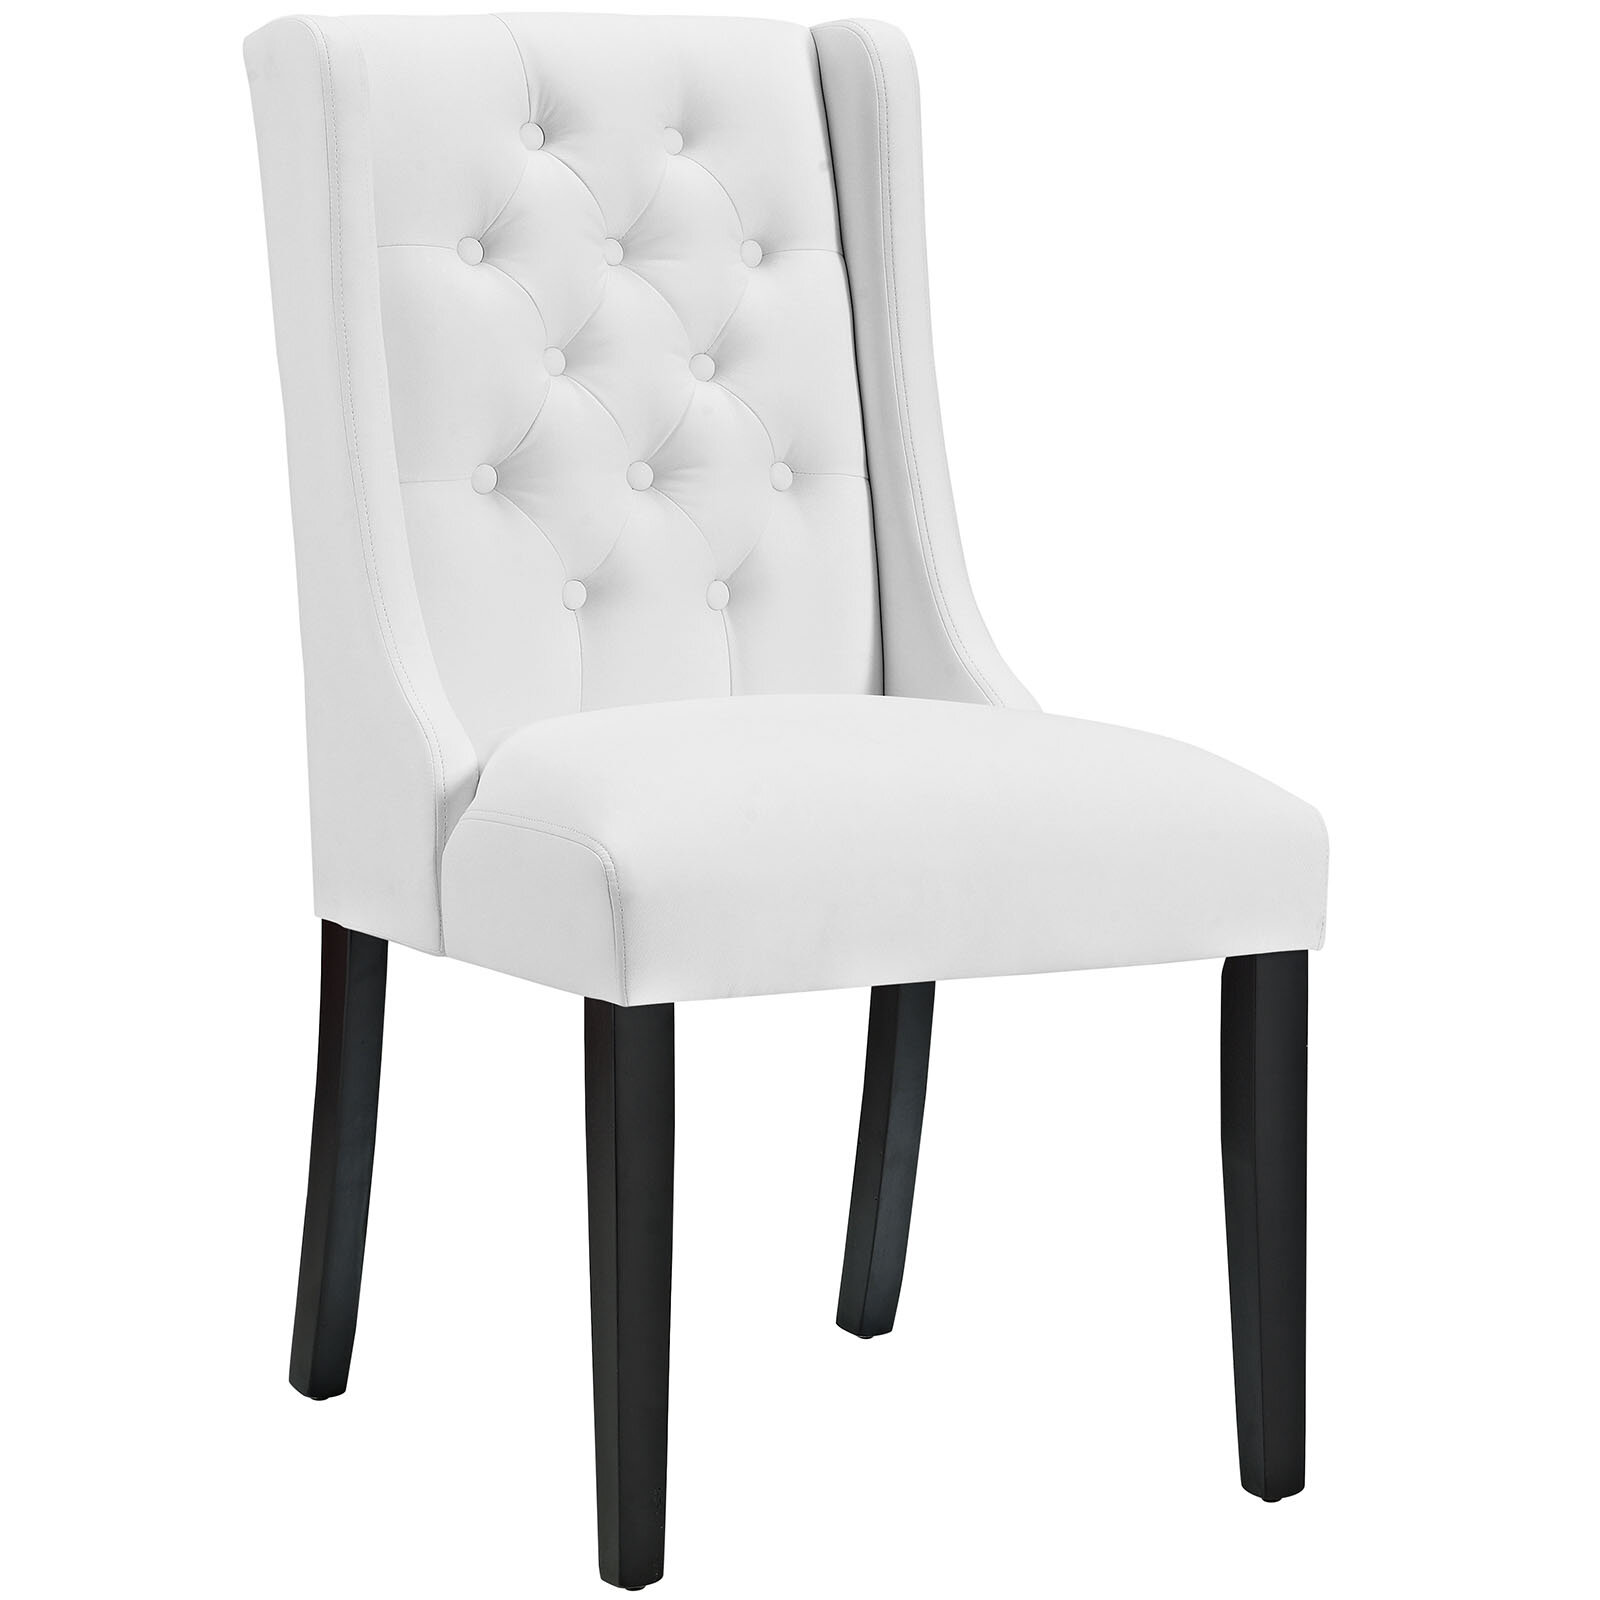 Modway Baronet Upholstered Dining Chair Reviews Wayfair